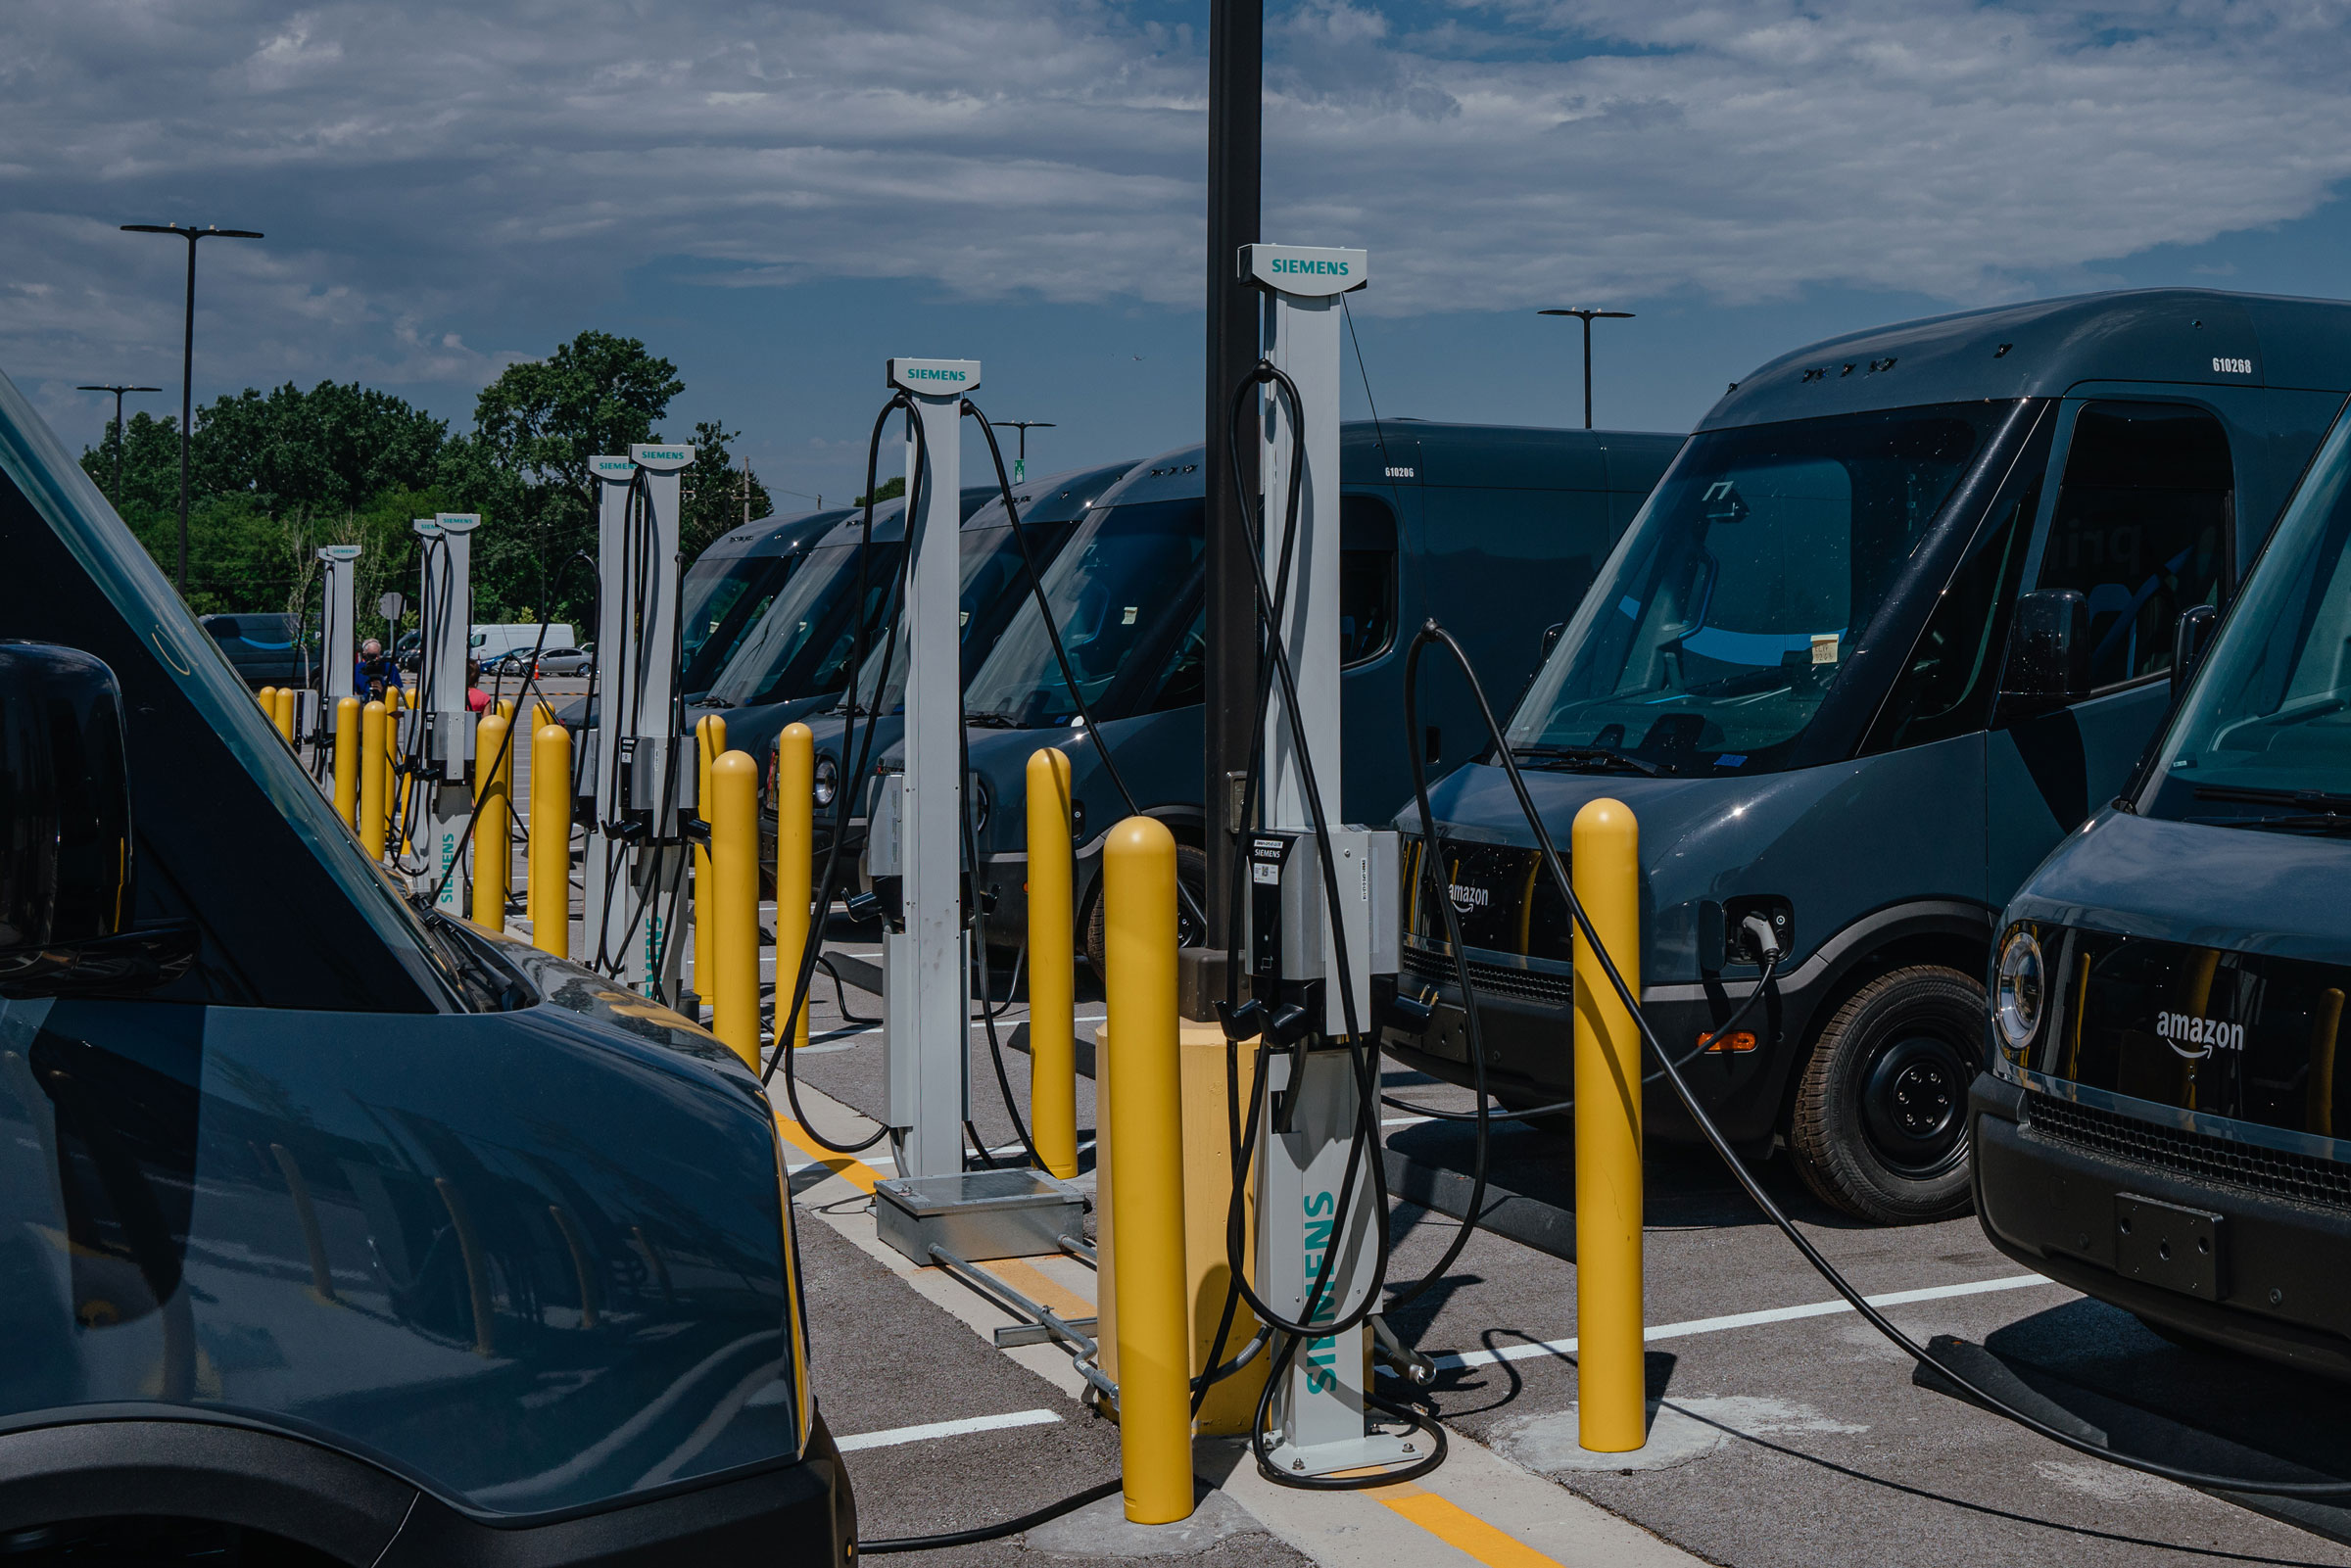 Amazon delivery electric vans (EV), built by Rivian Automotive, at charging stations parked outside the Amazon Logistics warehouse in Chicago, Illinois on Thursday, July 21, 2022. Amazon Inc. is starting delivery of packages to US customers using the first of as many as 100,000 electric vans built by Rivian Automotive Inc., which aims to hand over thousands of the vehicles this year. (JAMIE KELTER DAVIS—BLOOMBERG/GETTY IMAGES)